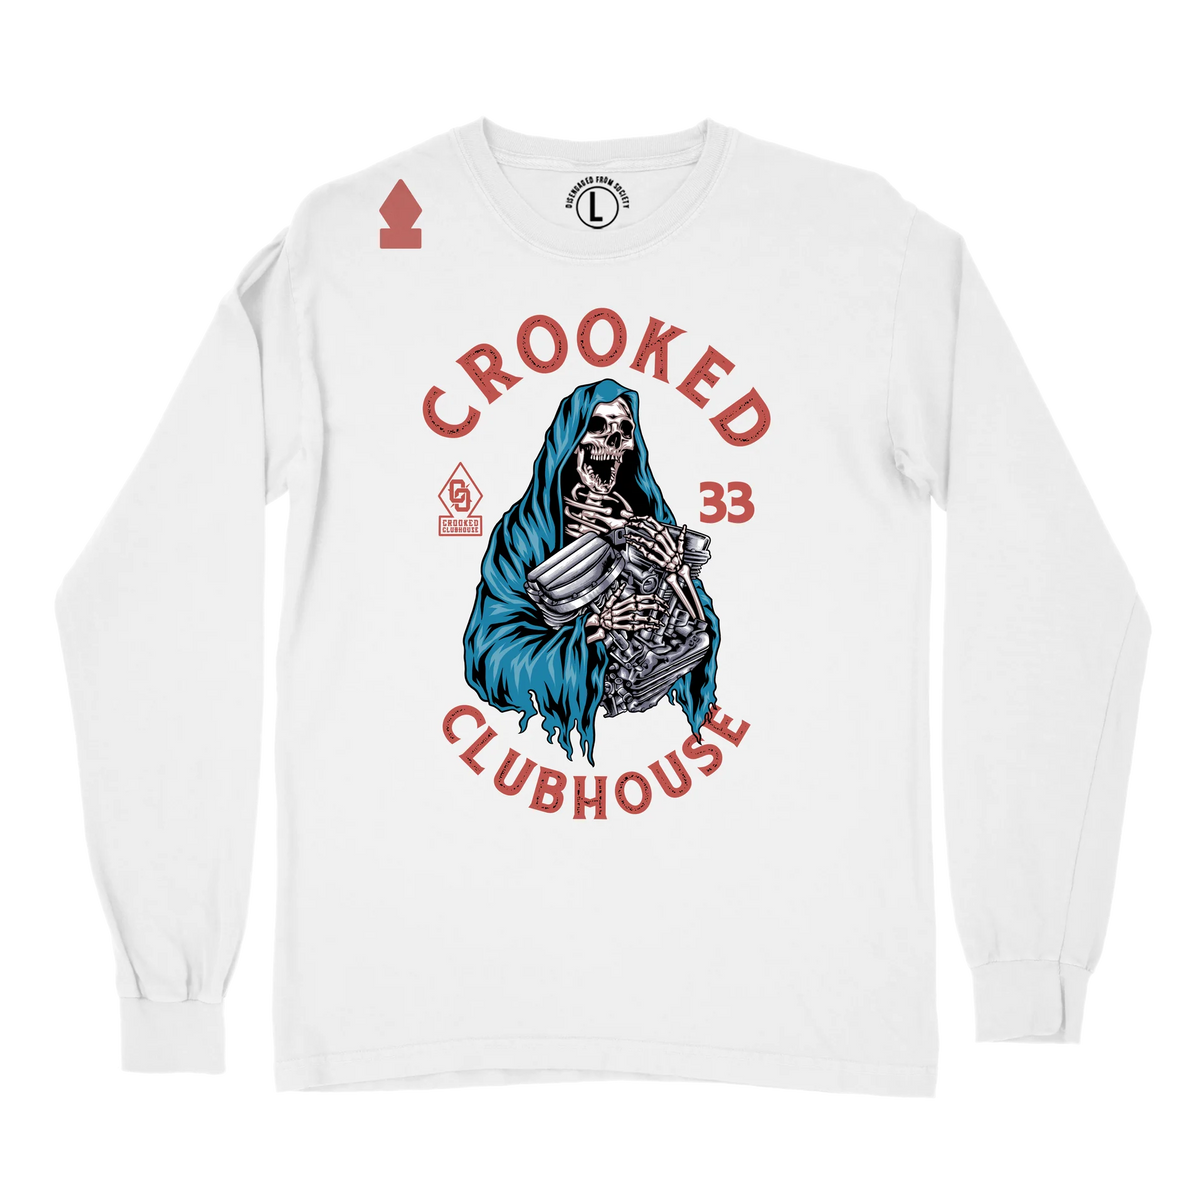 CROOKED-CLUBHOUSE-CARE-SCARE-LONGSLEEVE - Longsleeve - Synik Clothing - synikclothing.com